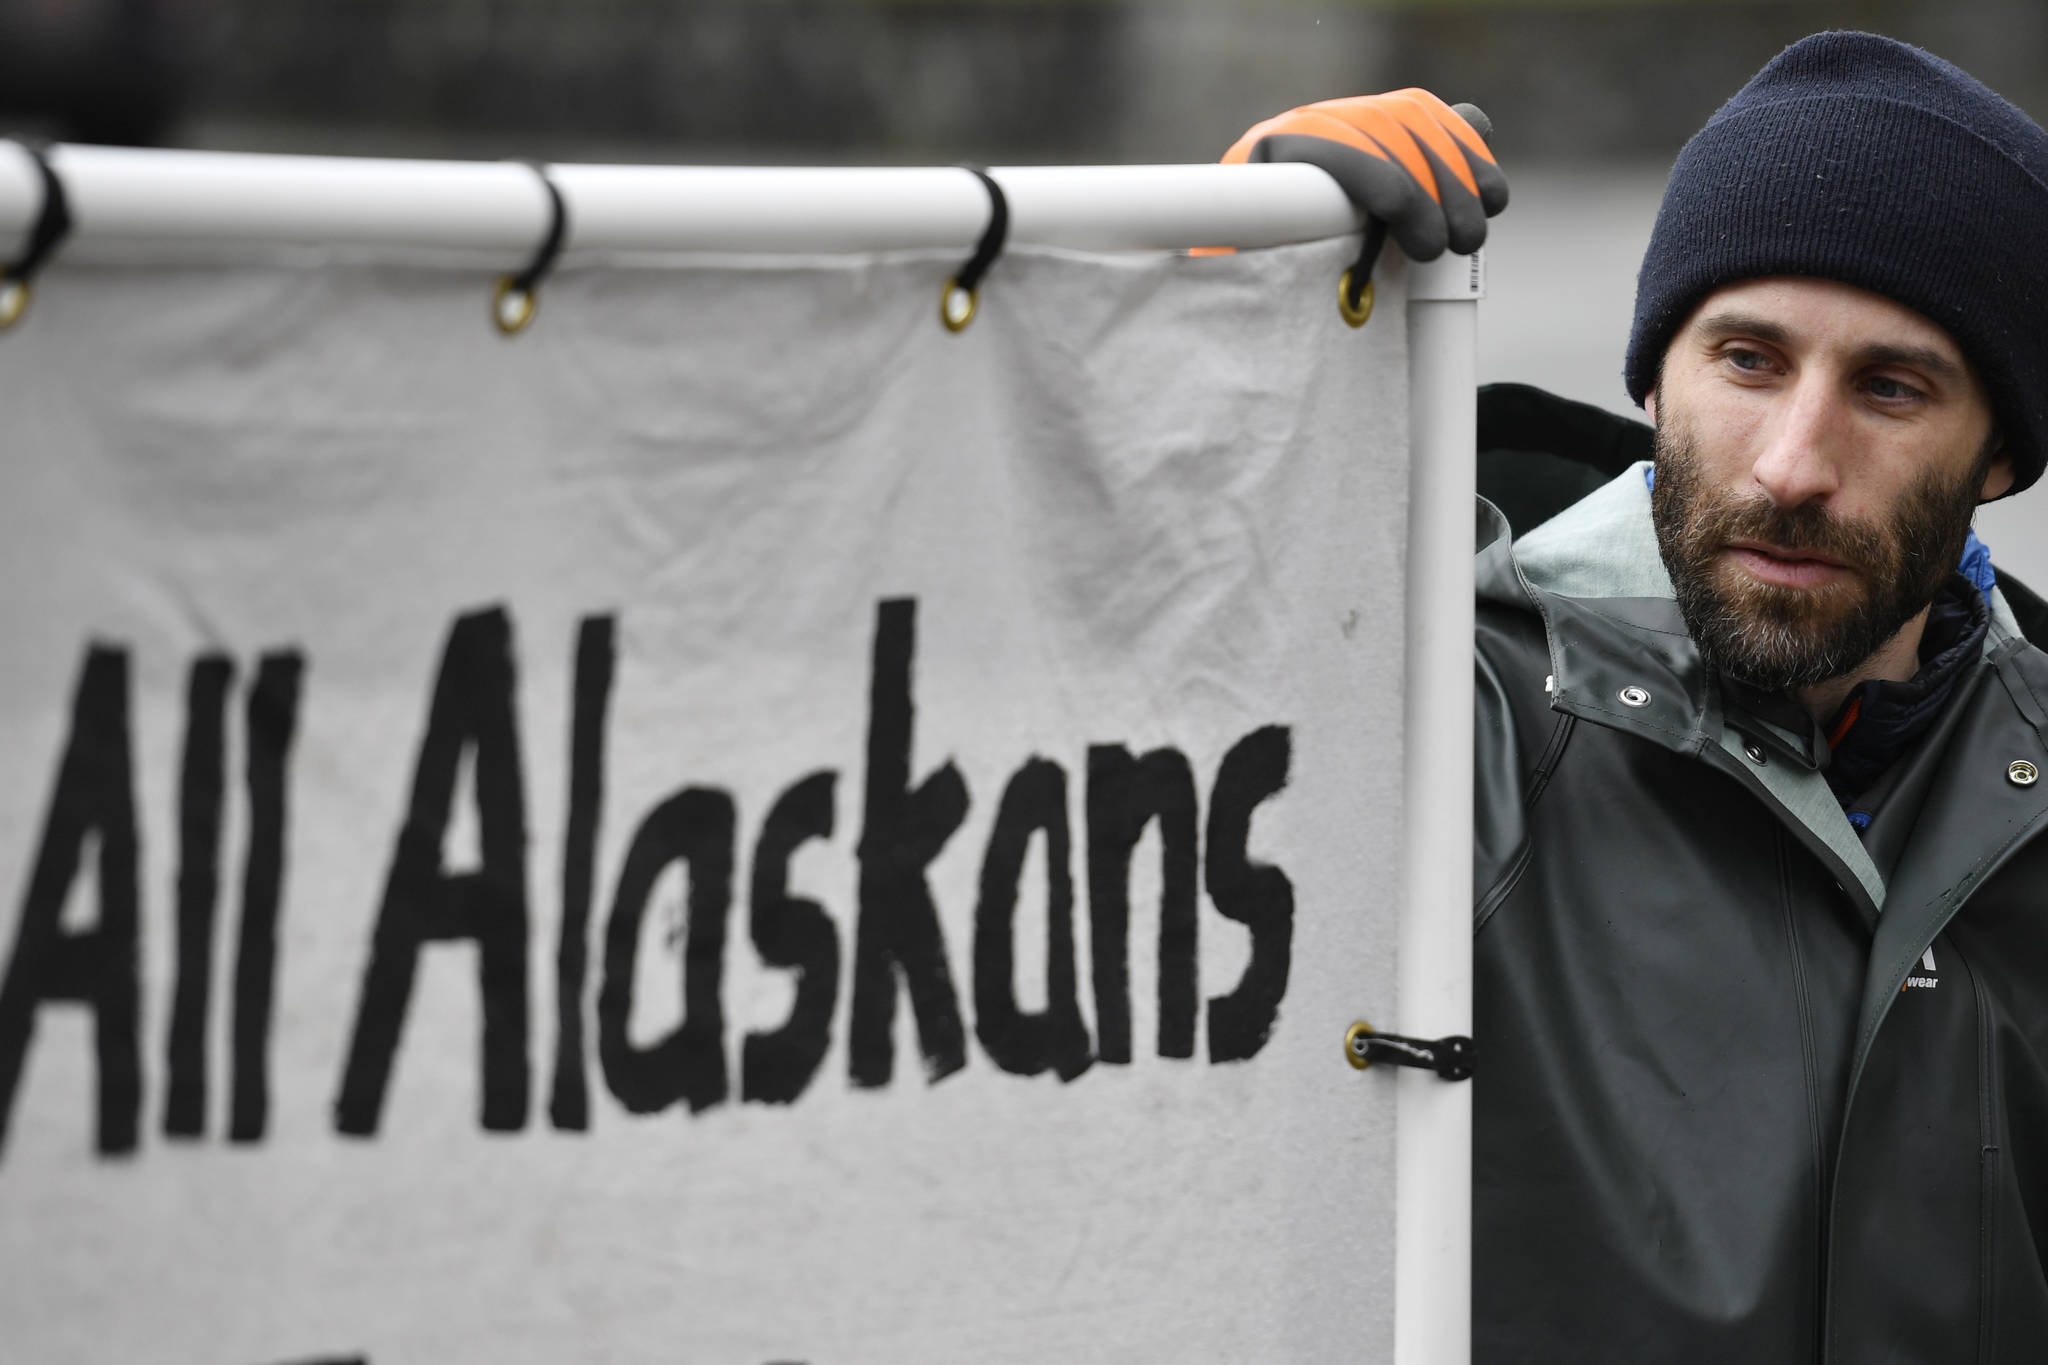 This Juneau man fills every lunch break with a peaceful protest at the Capitol